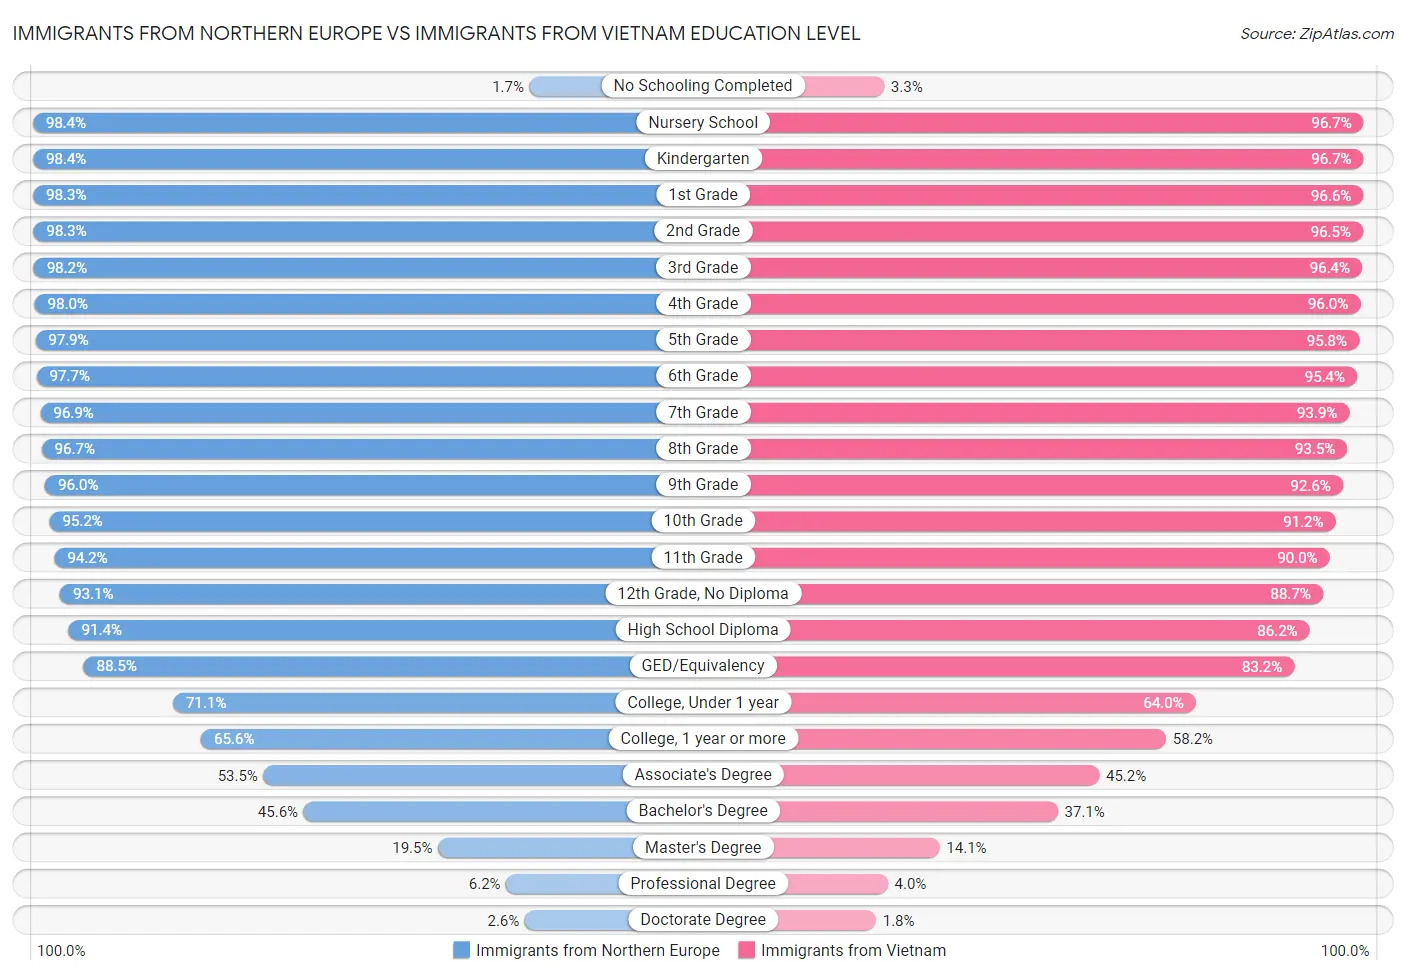 Immigrants from Northern Europe vs Immigrants from Vietnam Education Level